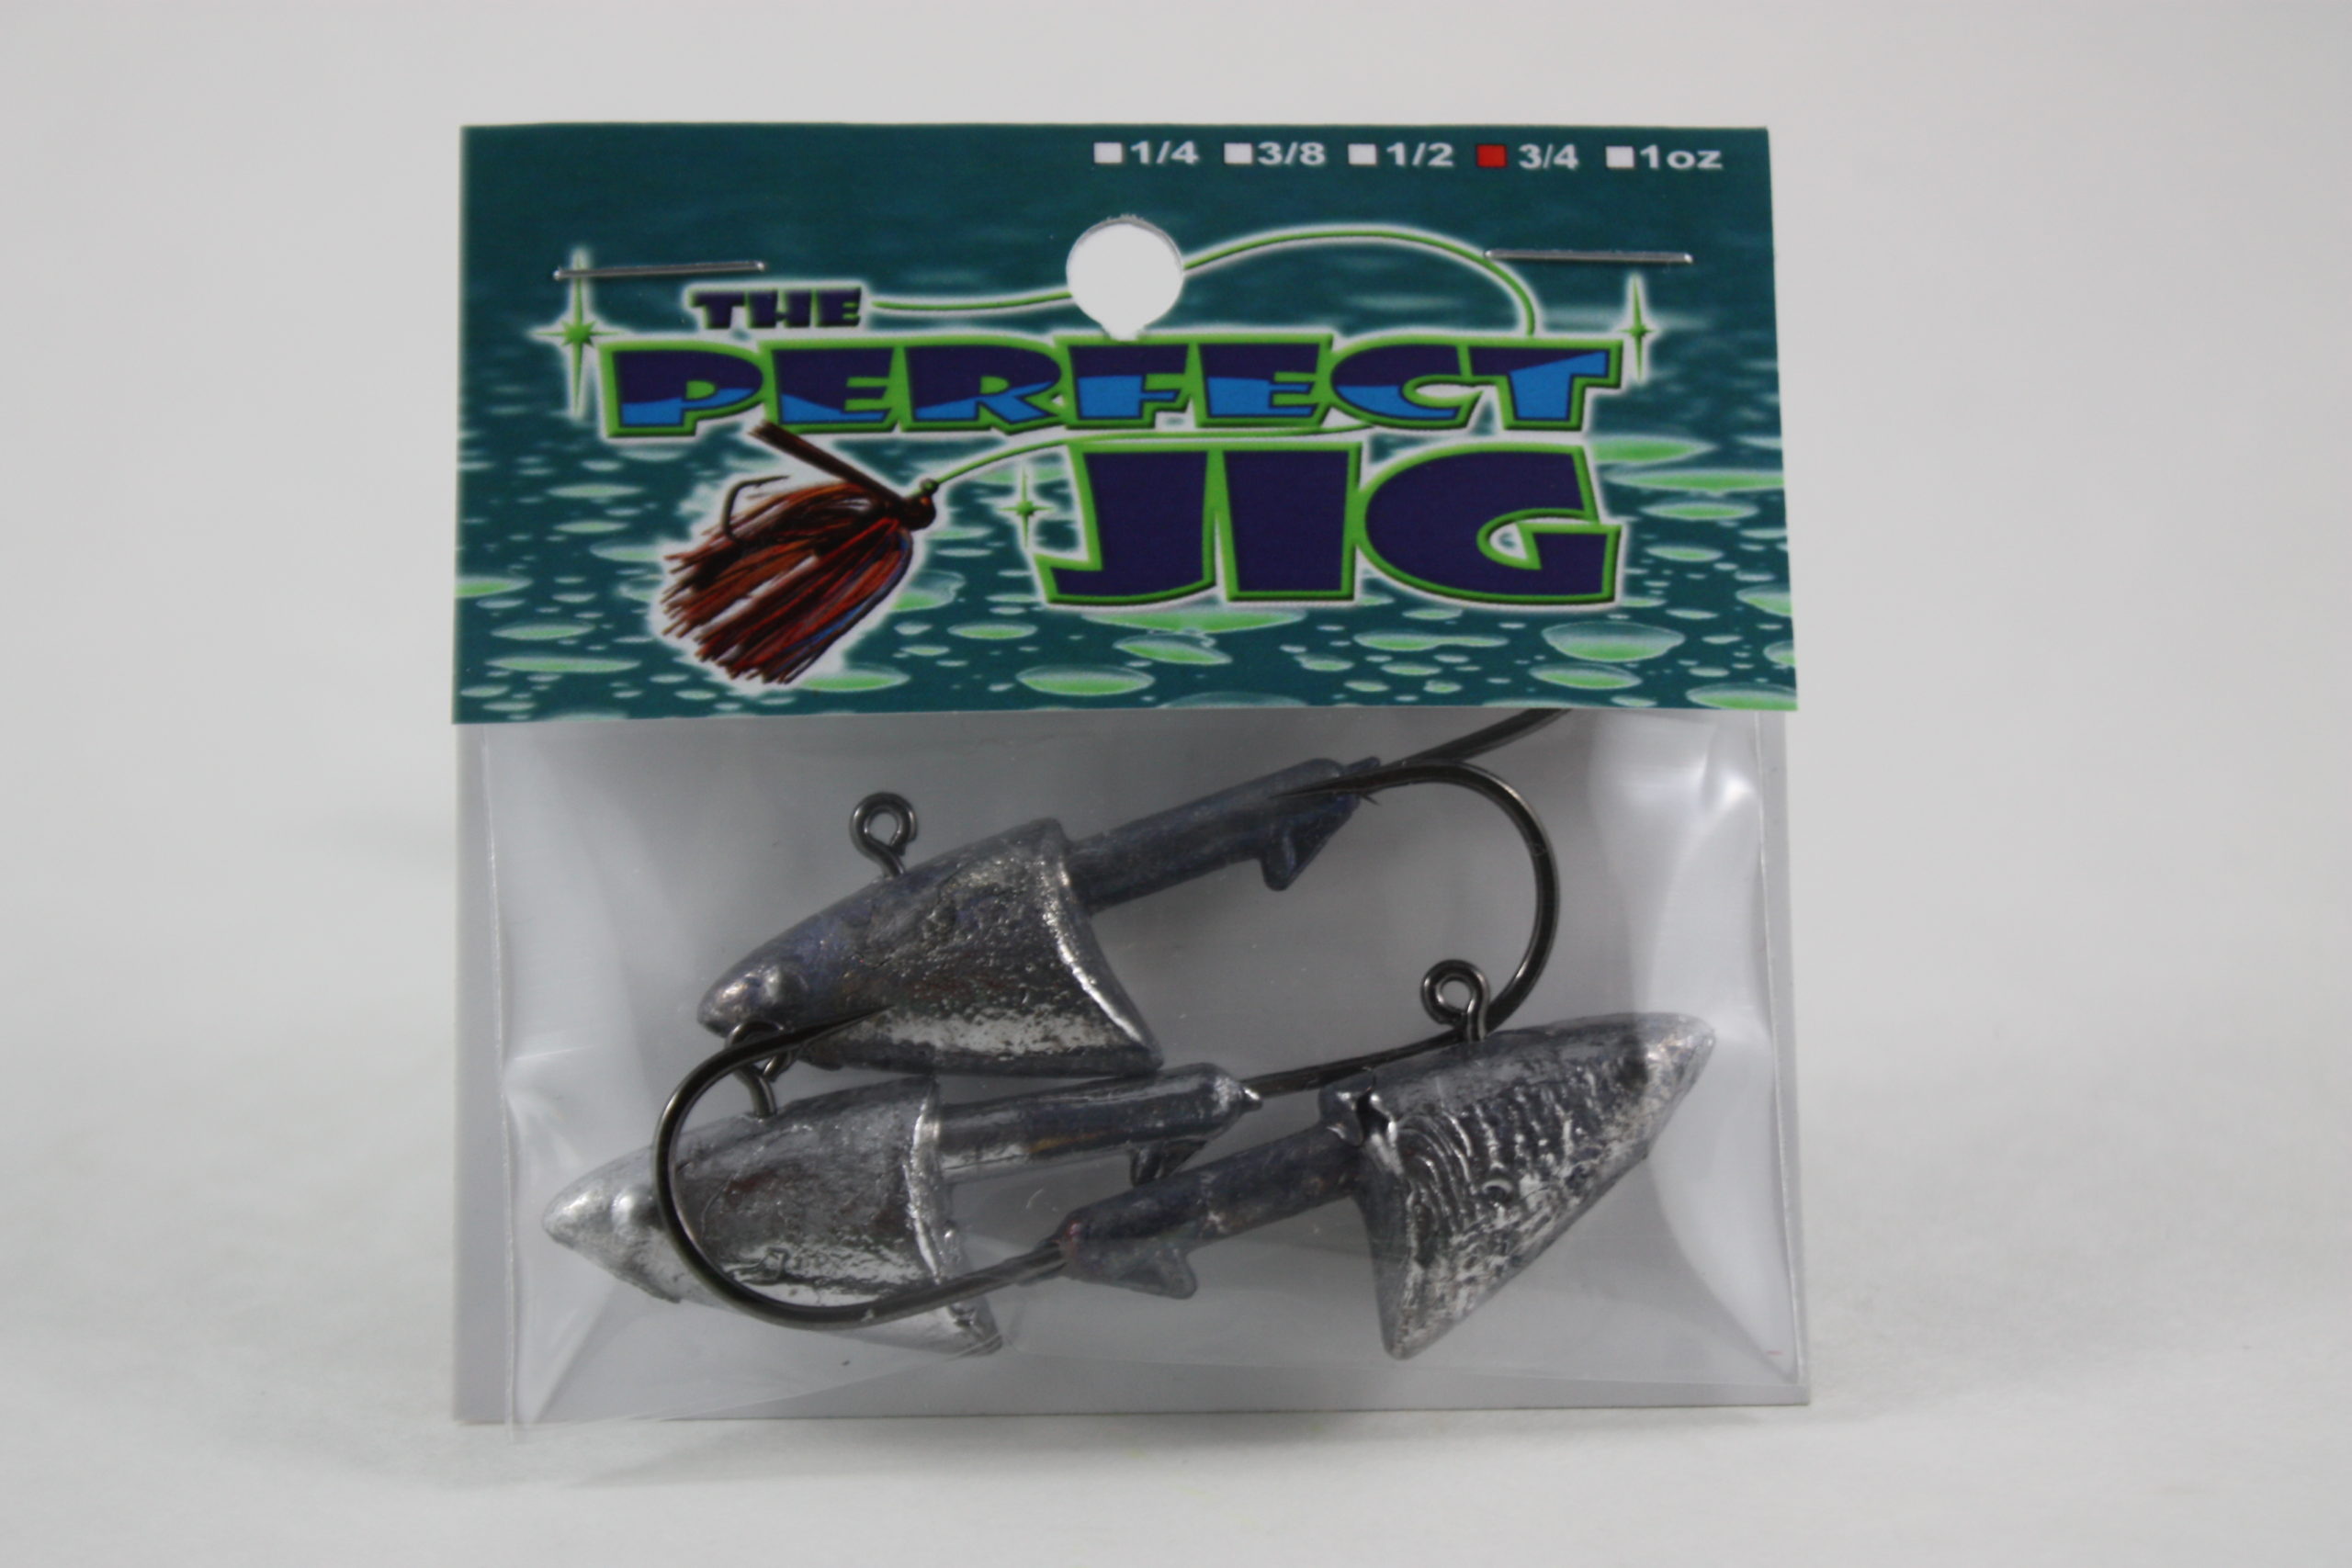 4oz Shad Head Jig on 10/0 hook - pack of 3 by DB Angling Supplies